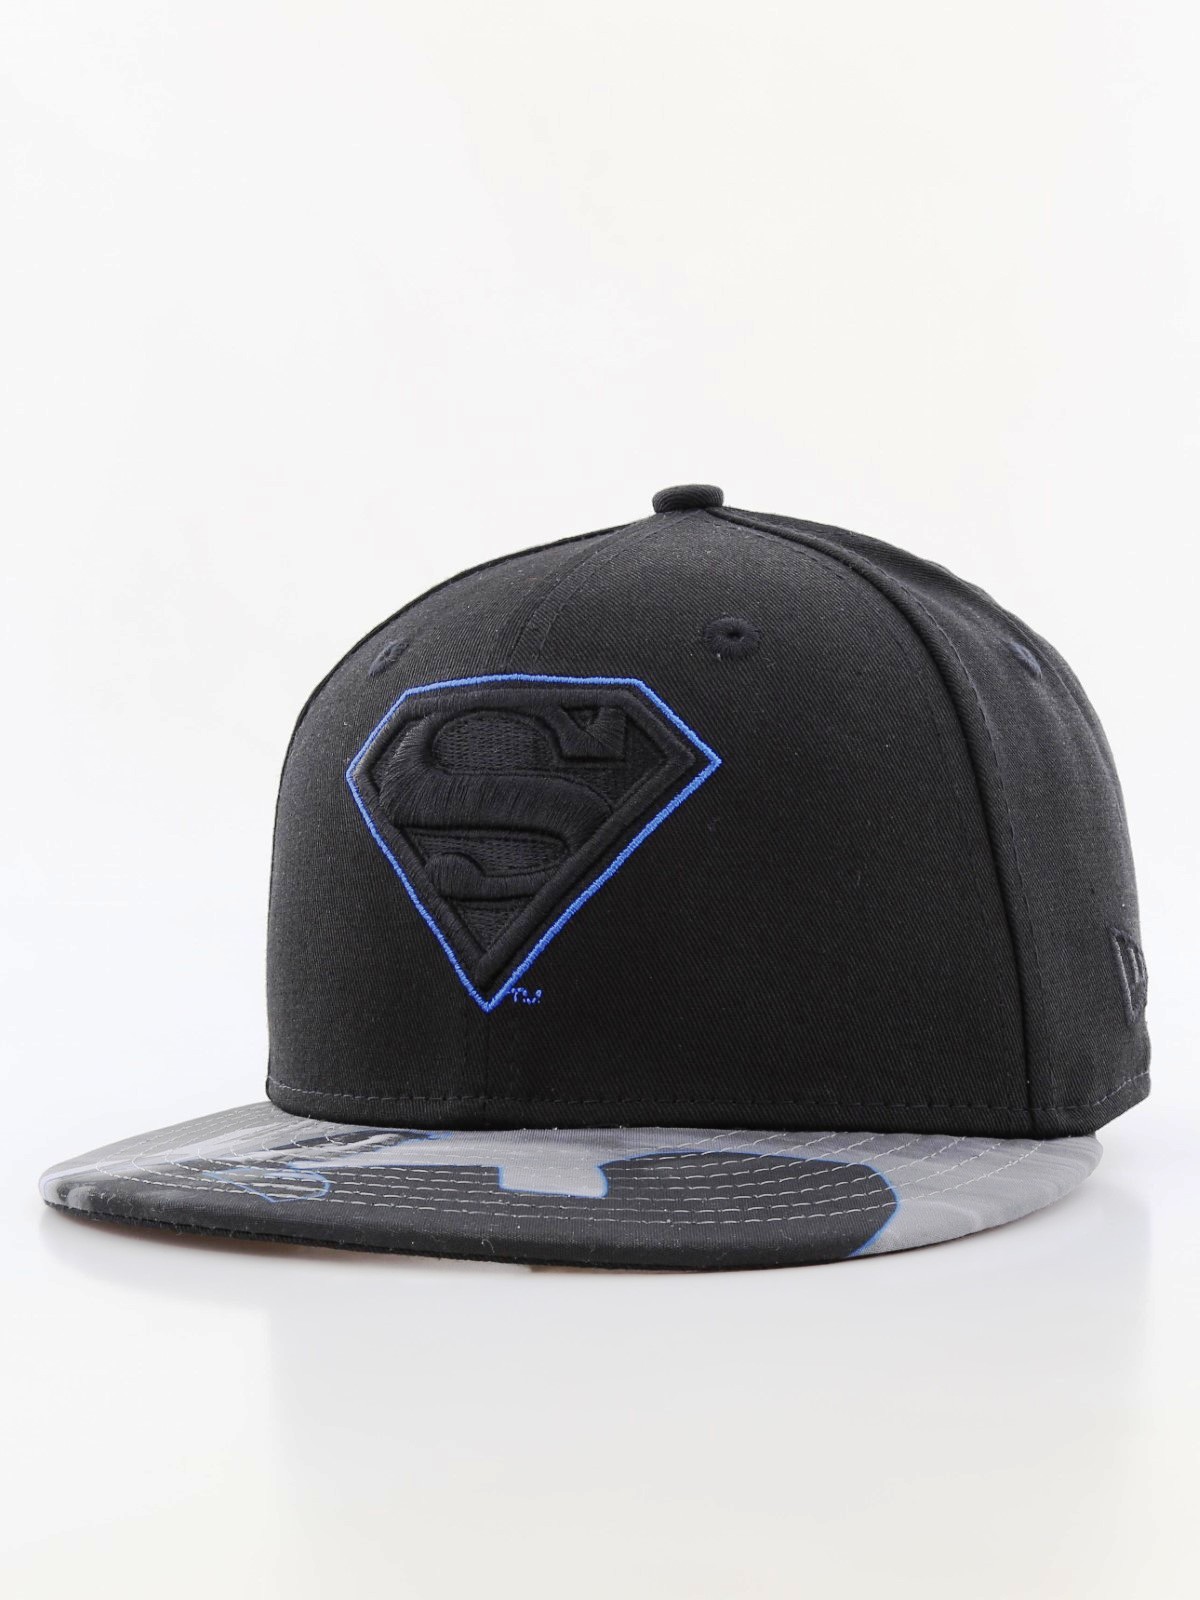 New Era Character Outline Superman Youth Boys Cap Black